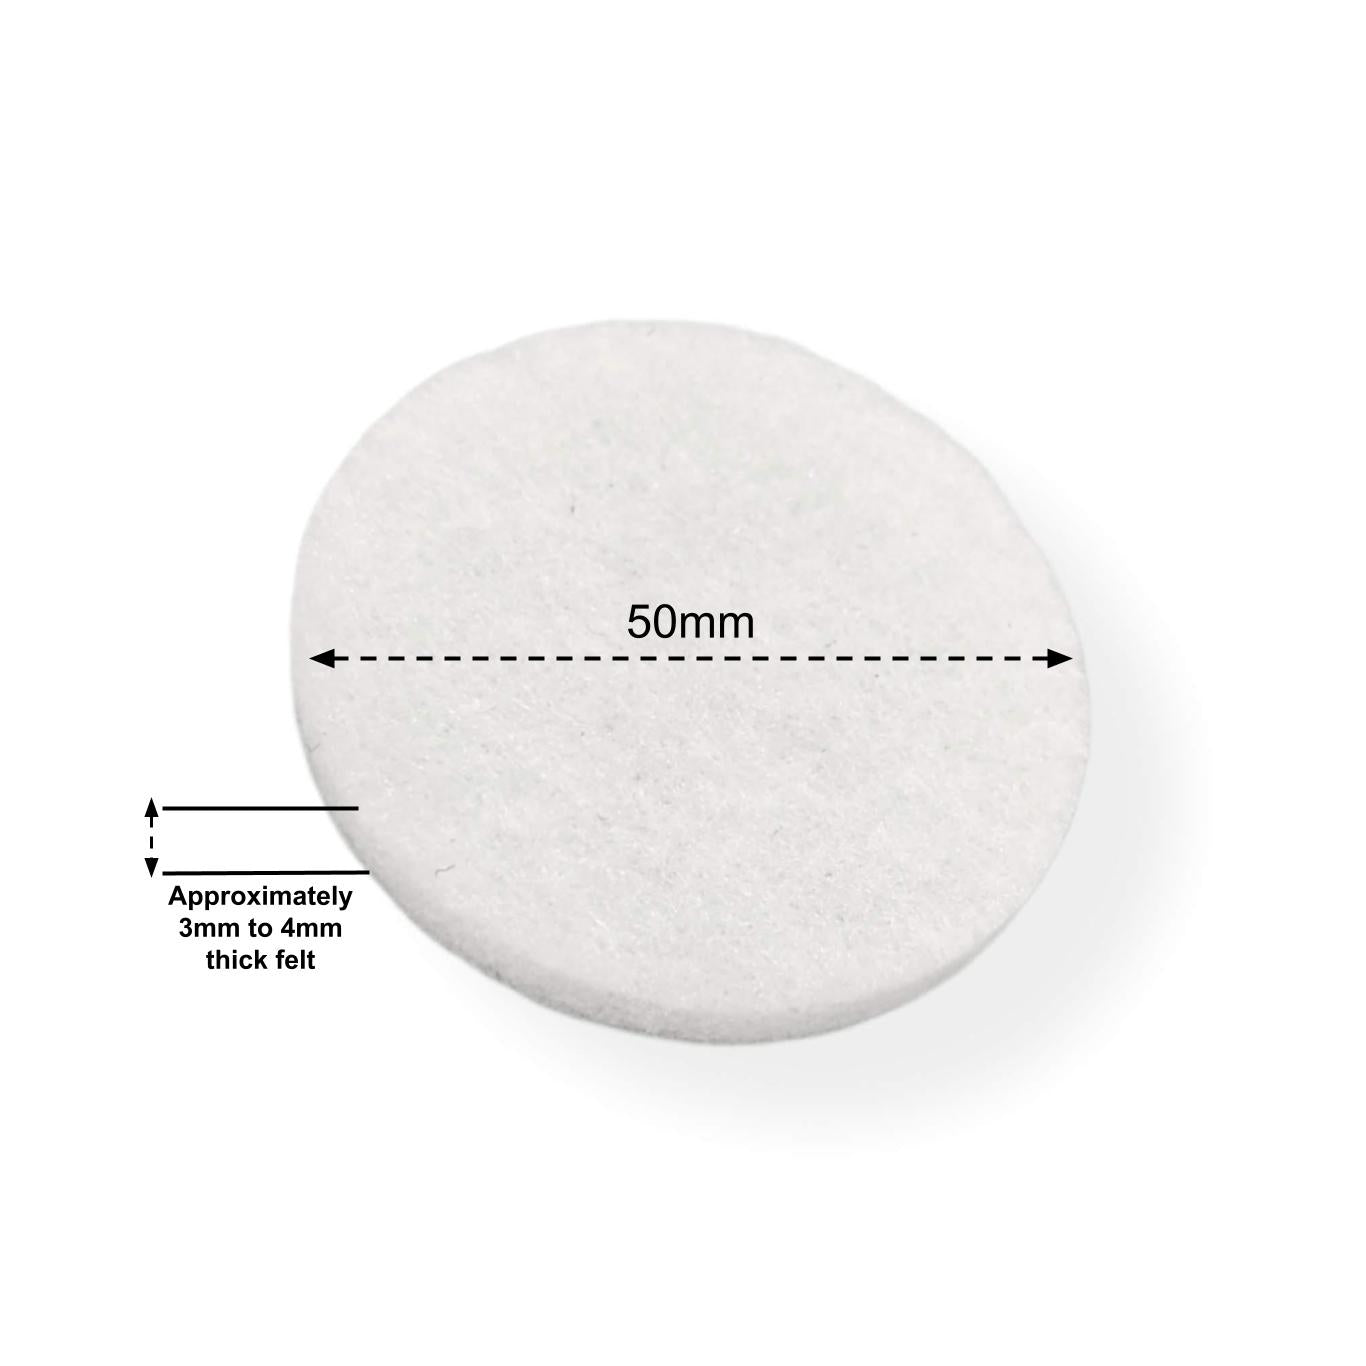 Felt Pads - White Self Adhesive Stick on Felt - Round 50mm Diameter - Made in Germany - Keay Vital Parts